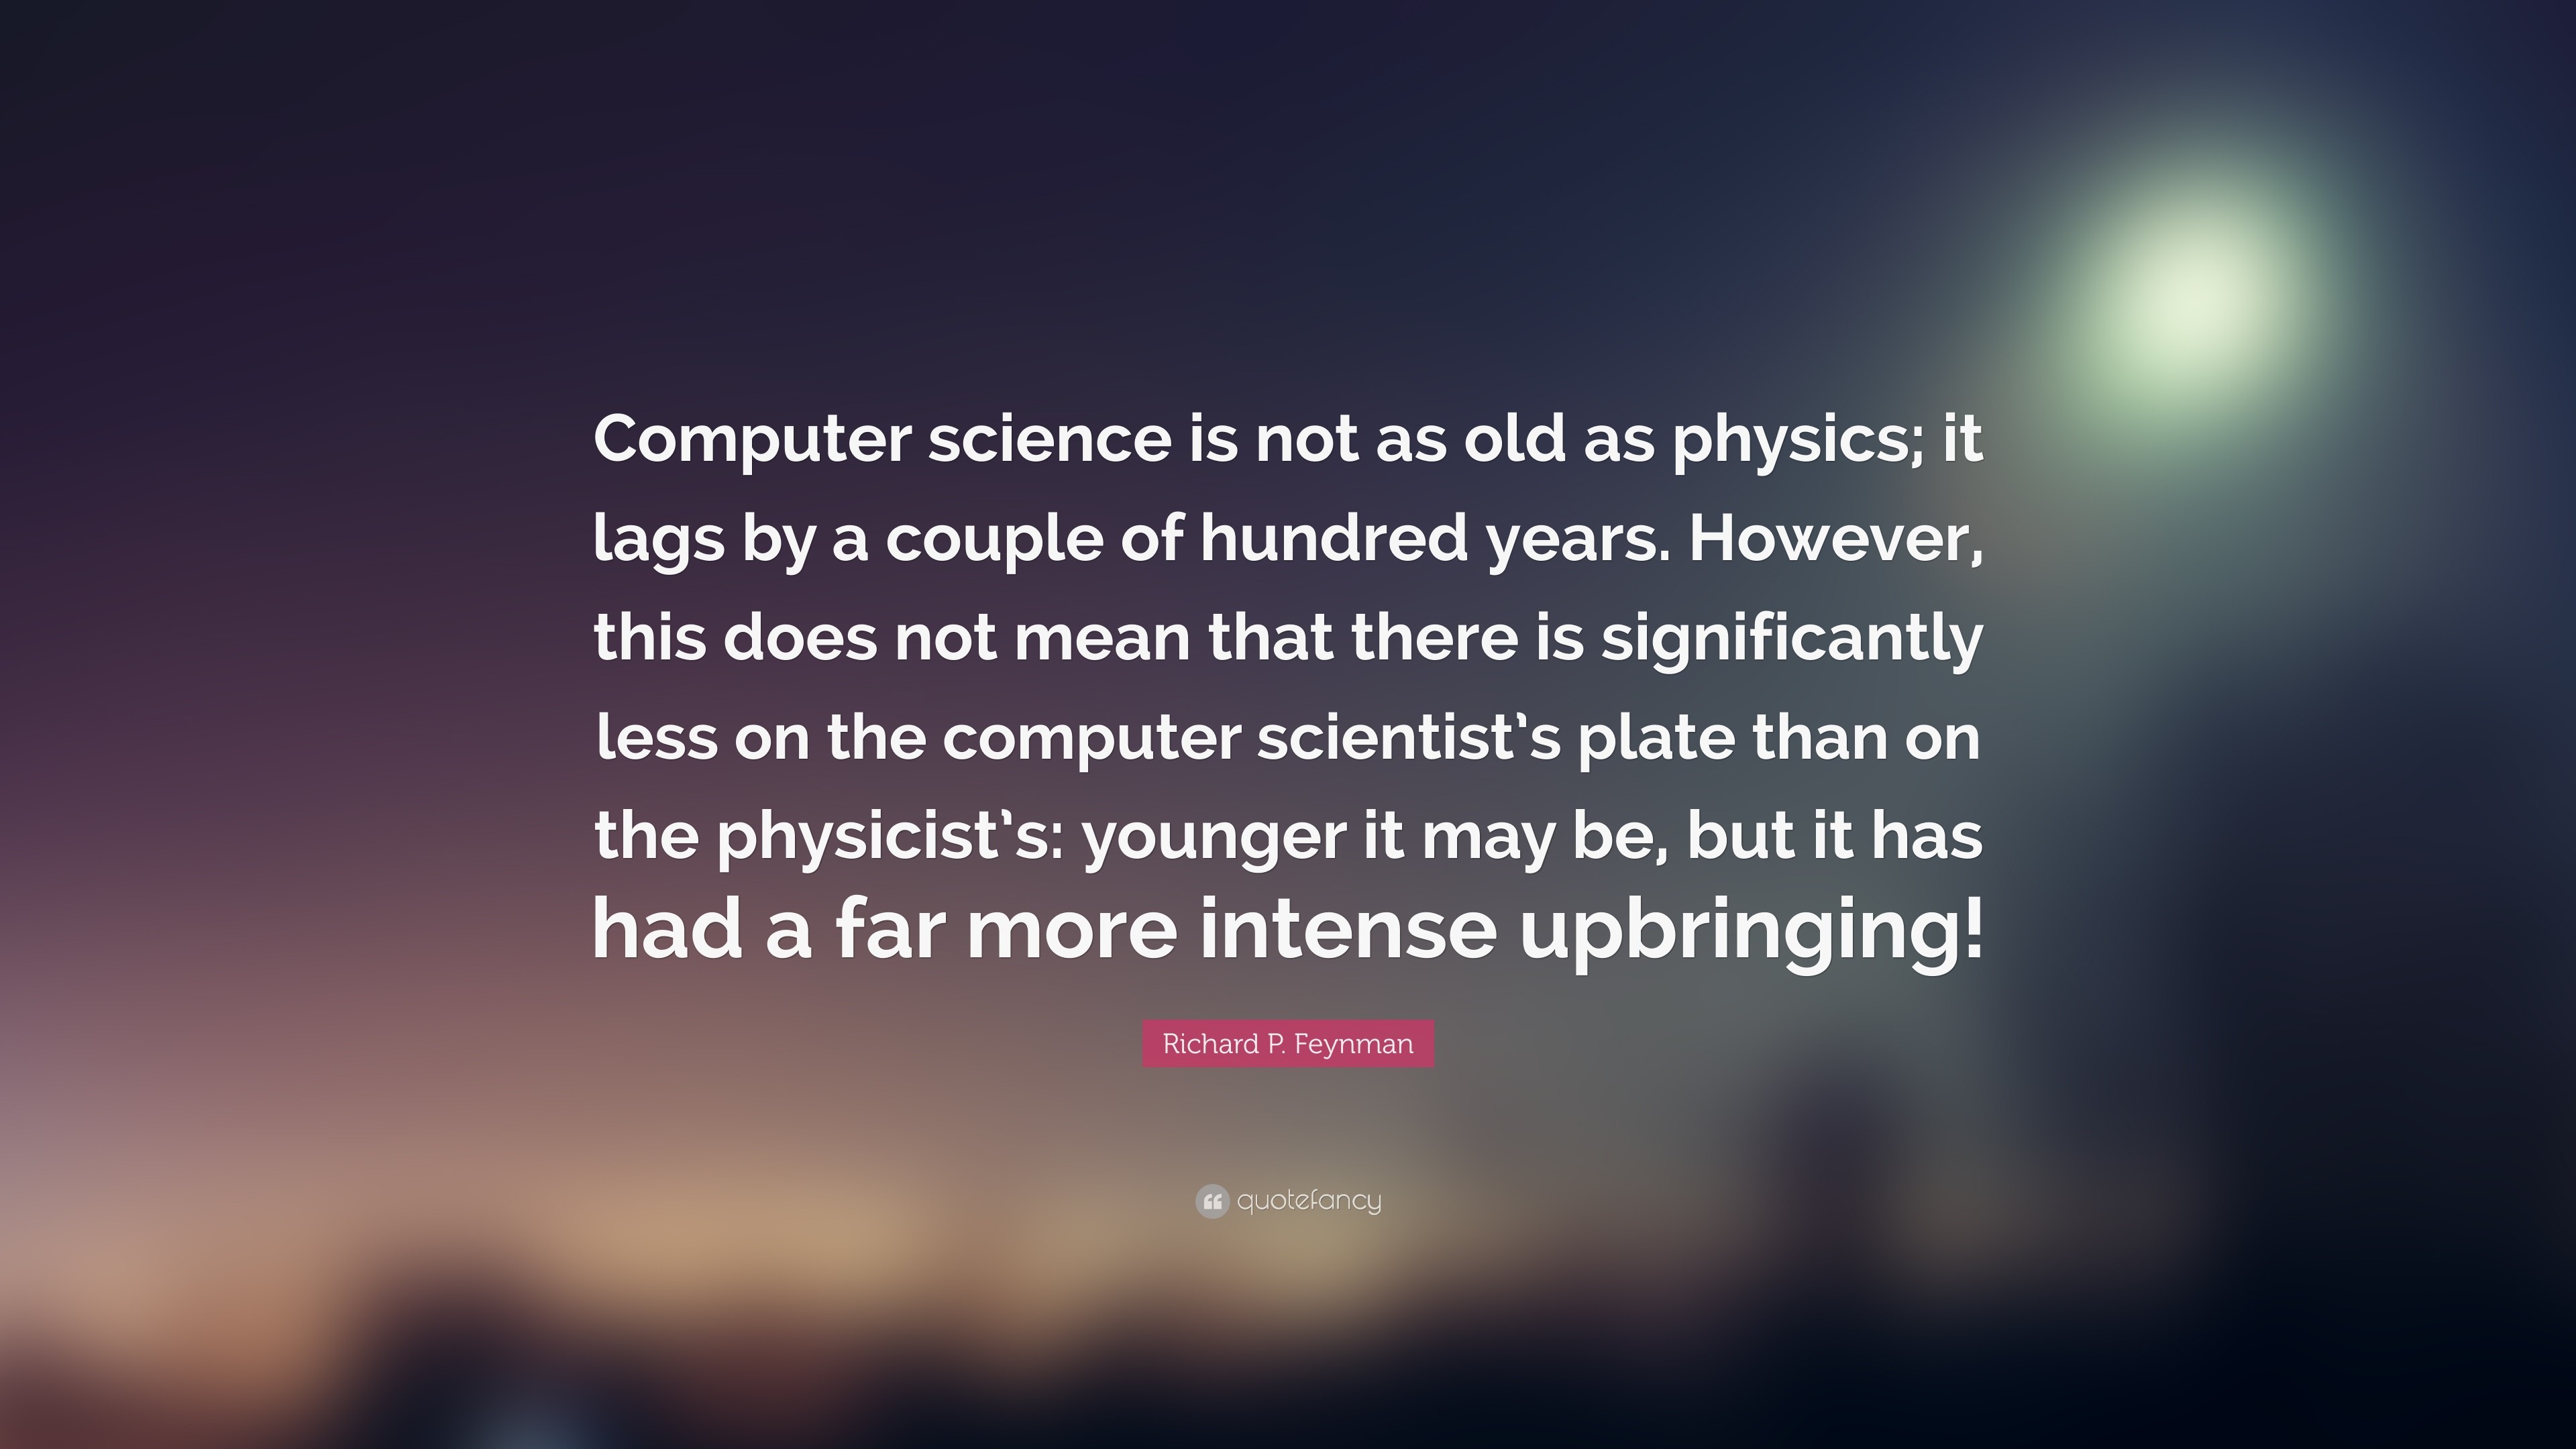 Richard P. Feynman Quote: “Computer science is not as old as physics;